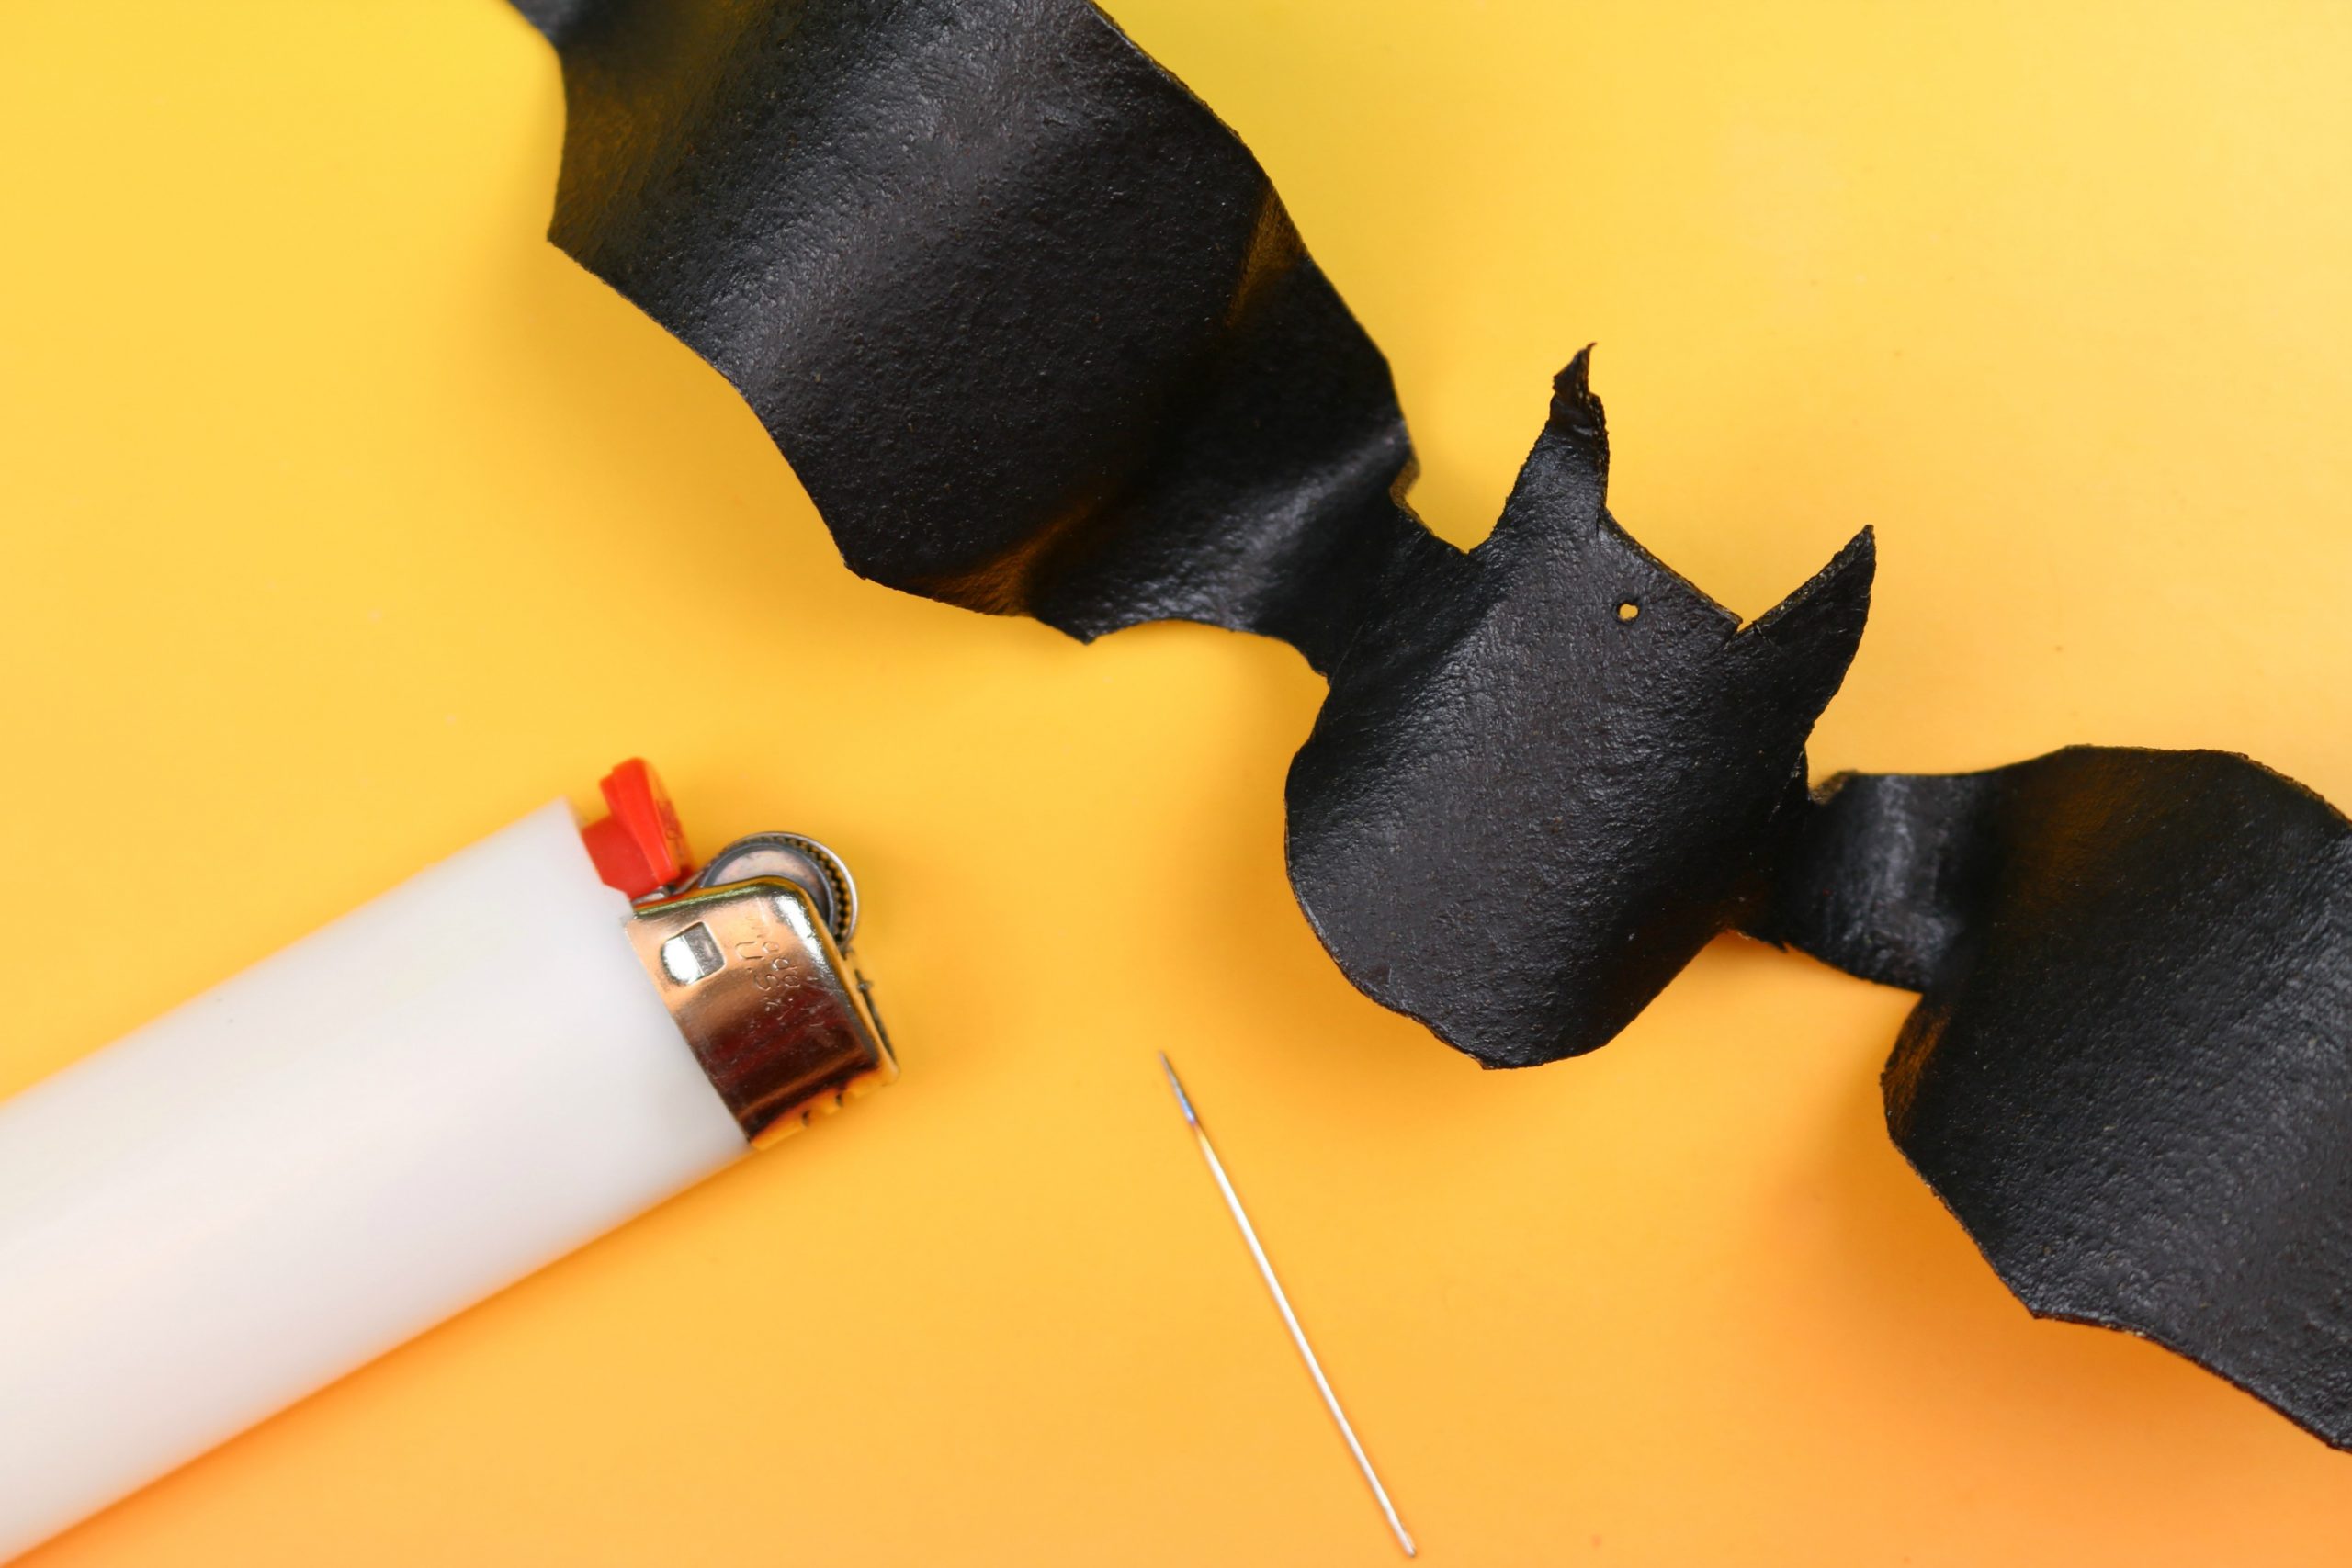 black bat shape cut out of worbla plastic with lighter